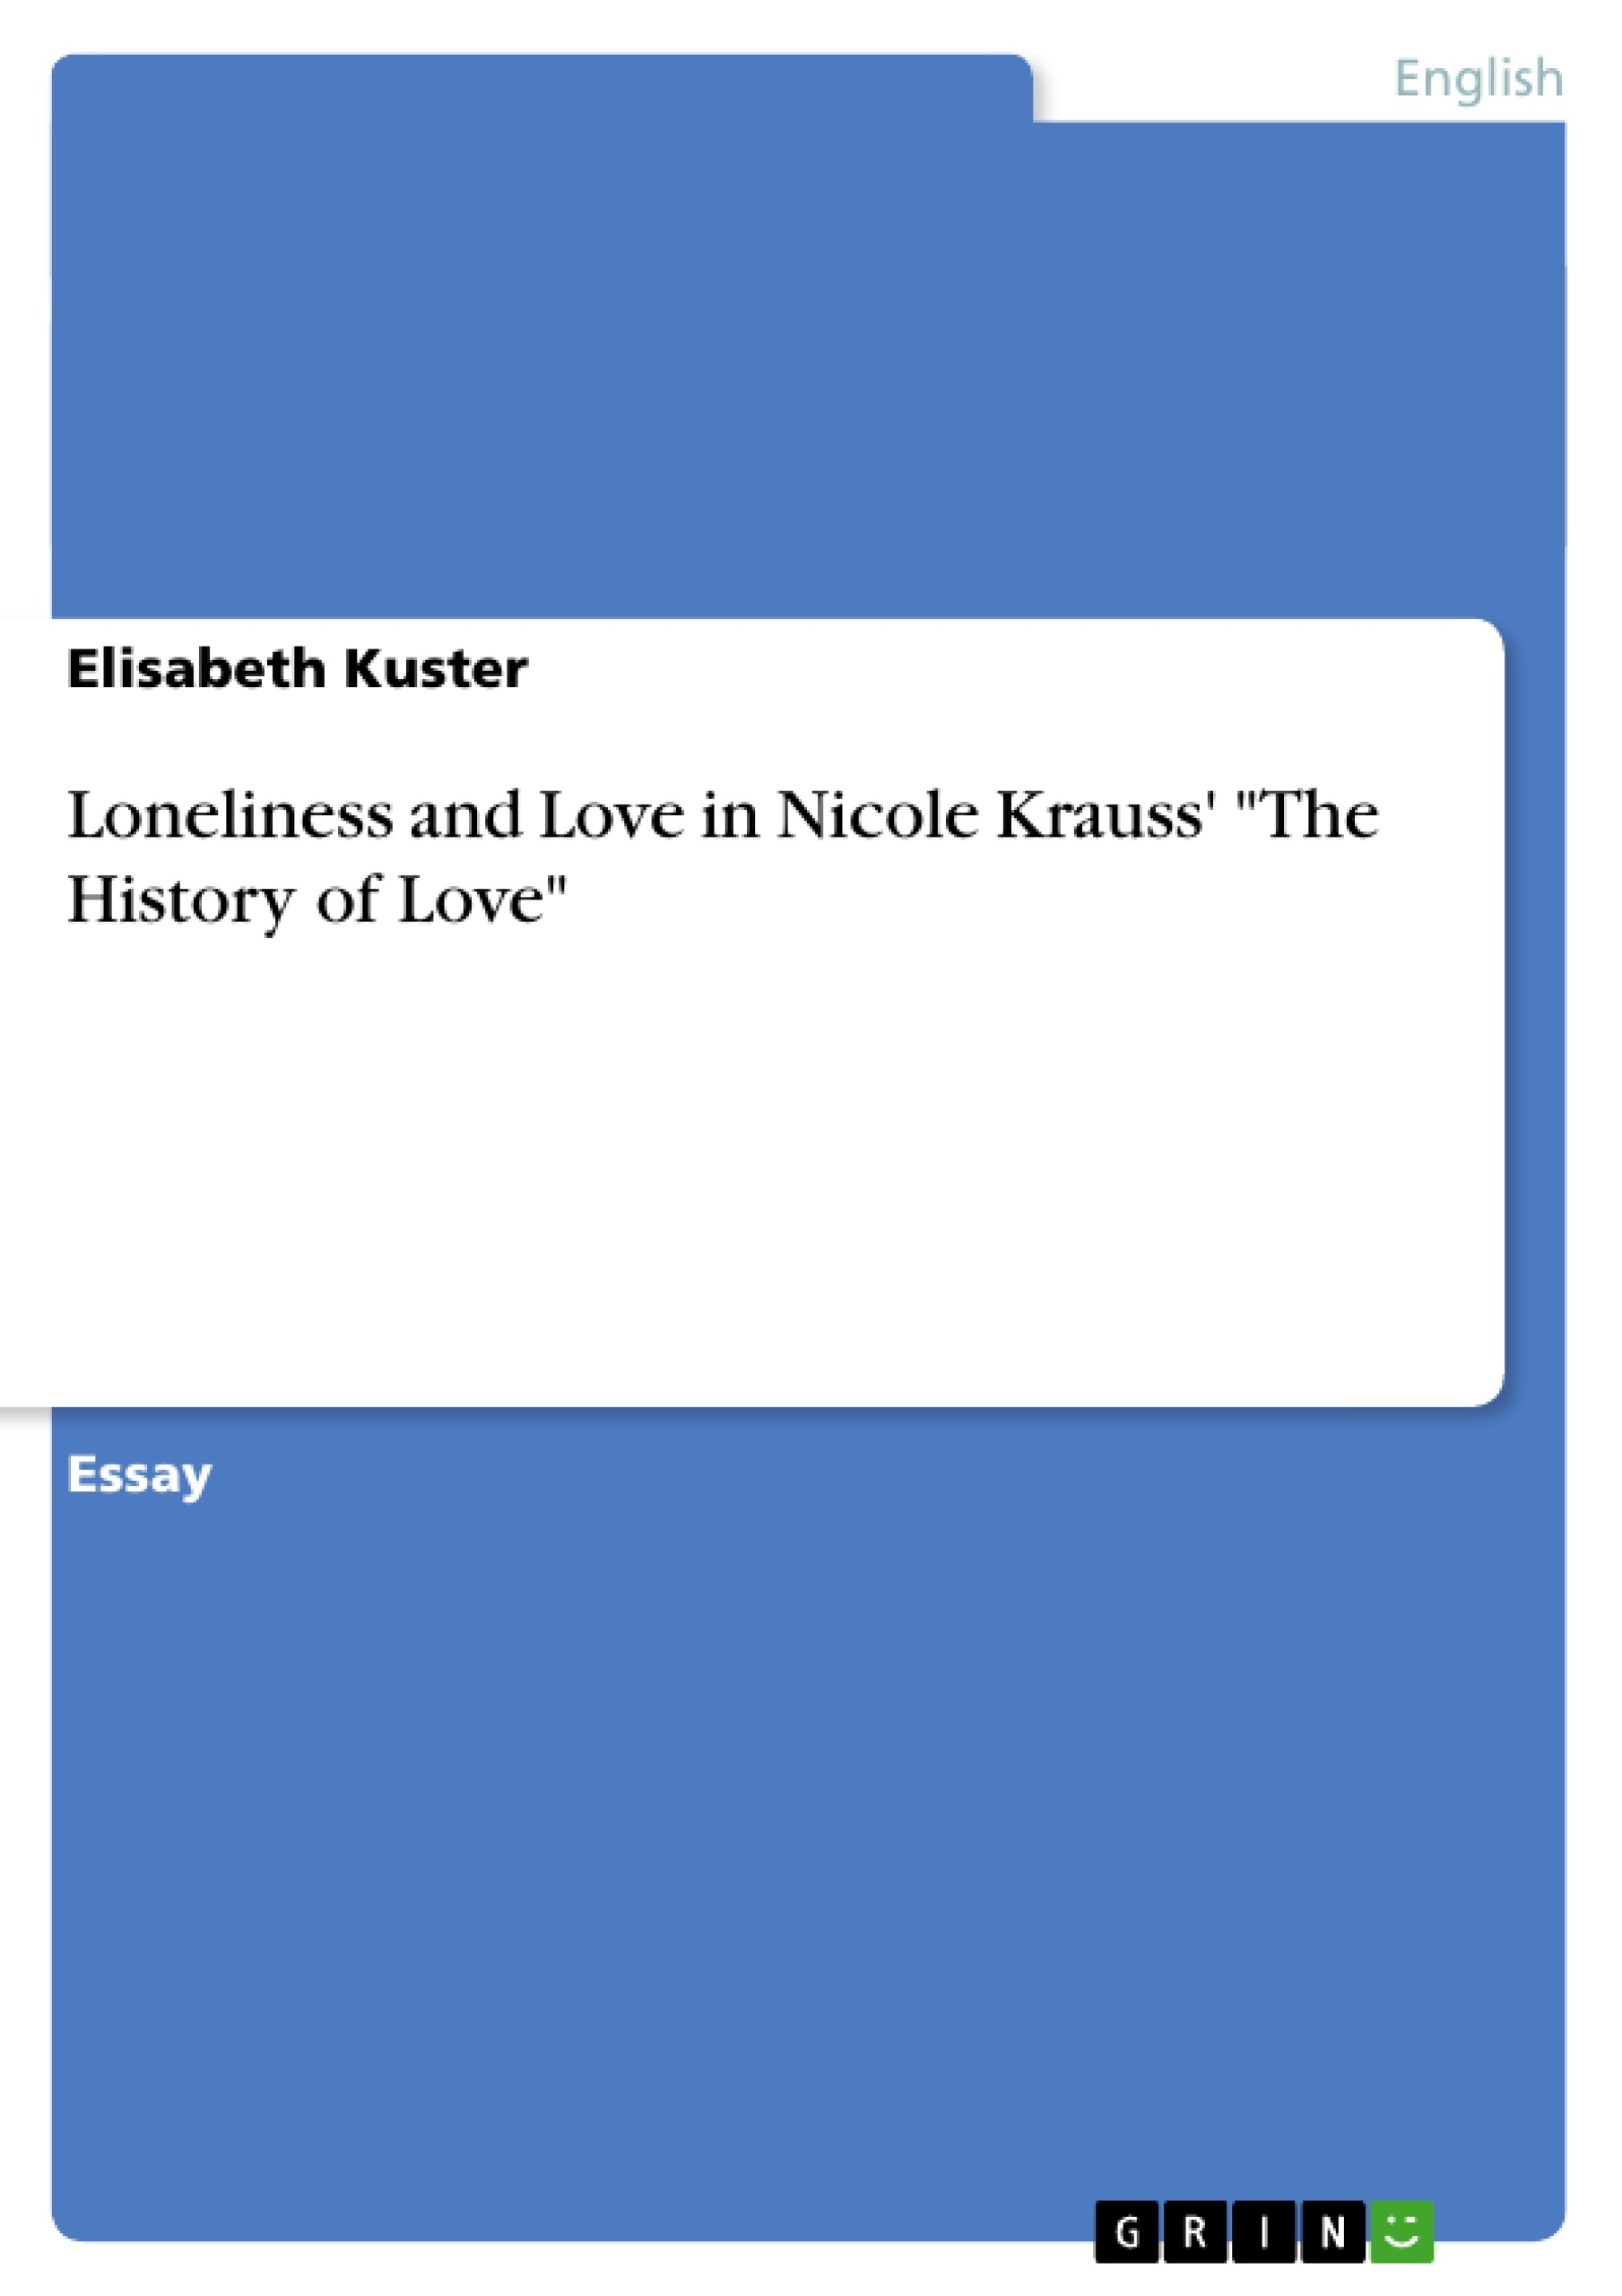 Titre: Loneliness and Love in Nicole Krauss' "The History of Love"